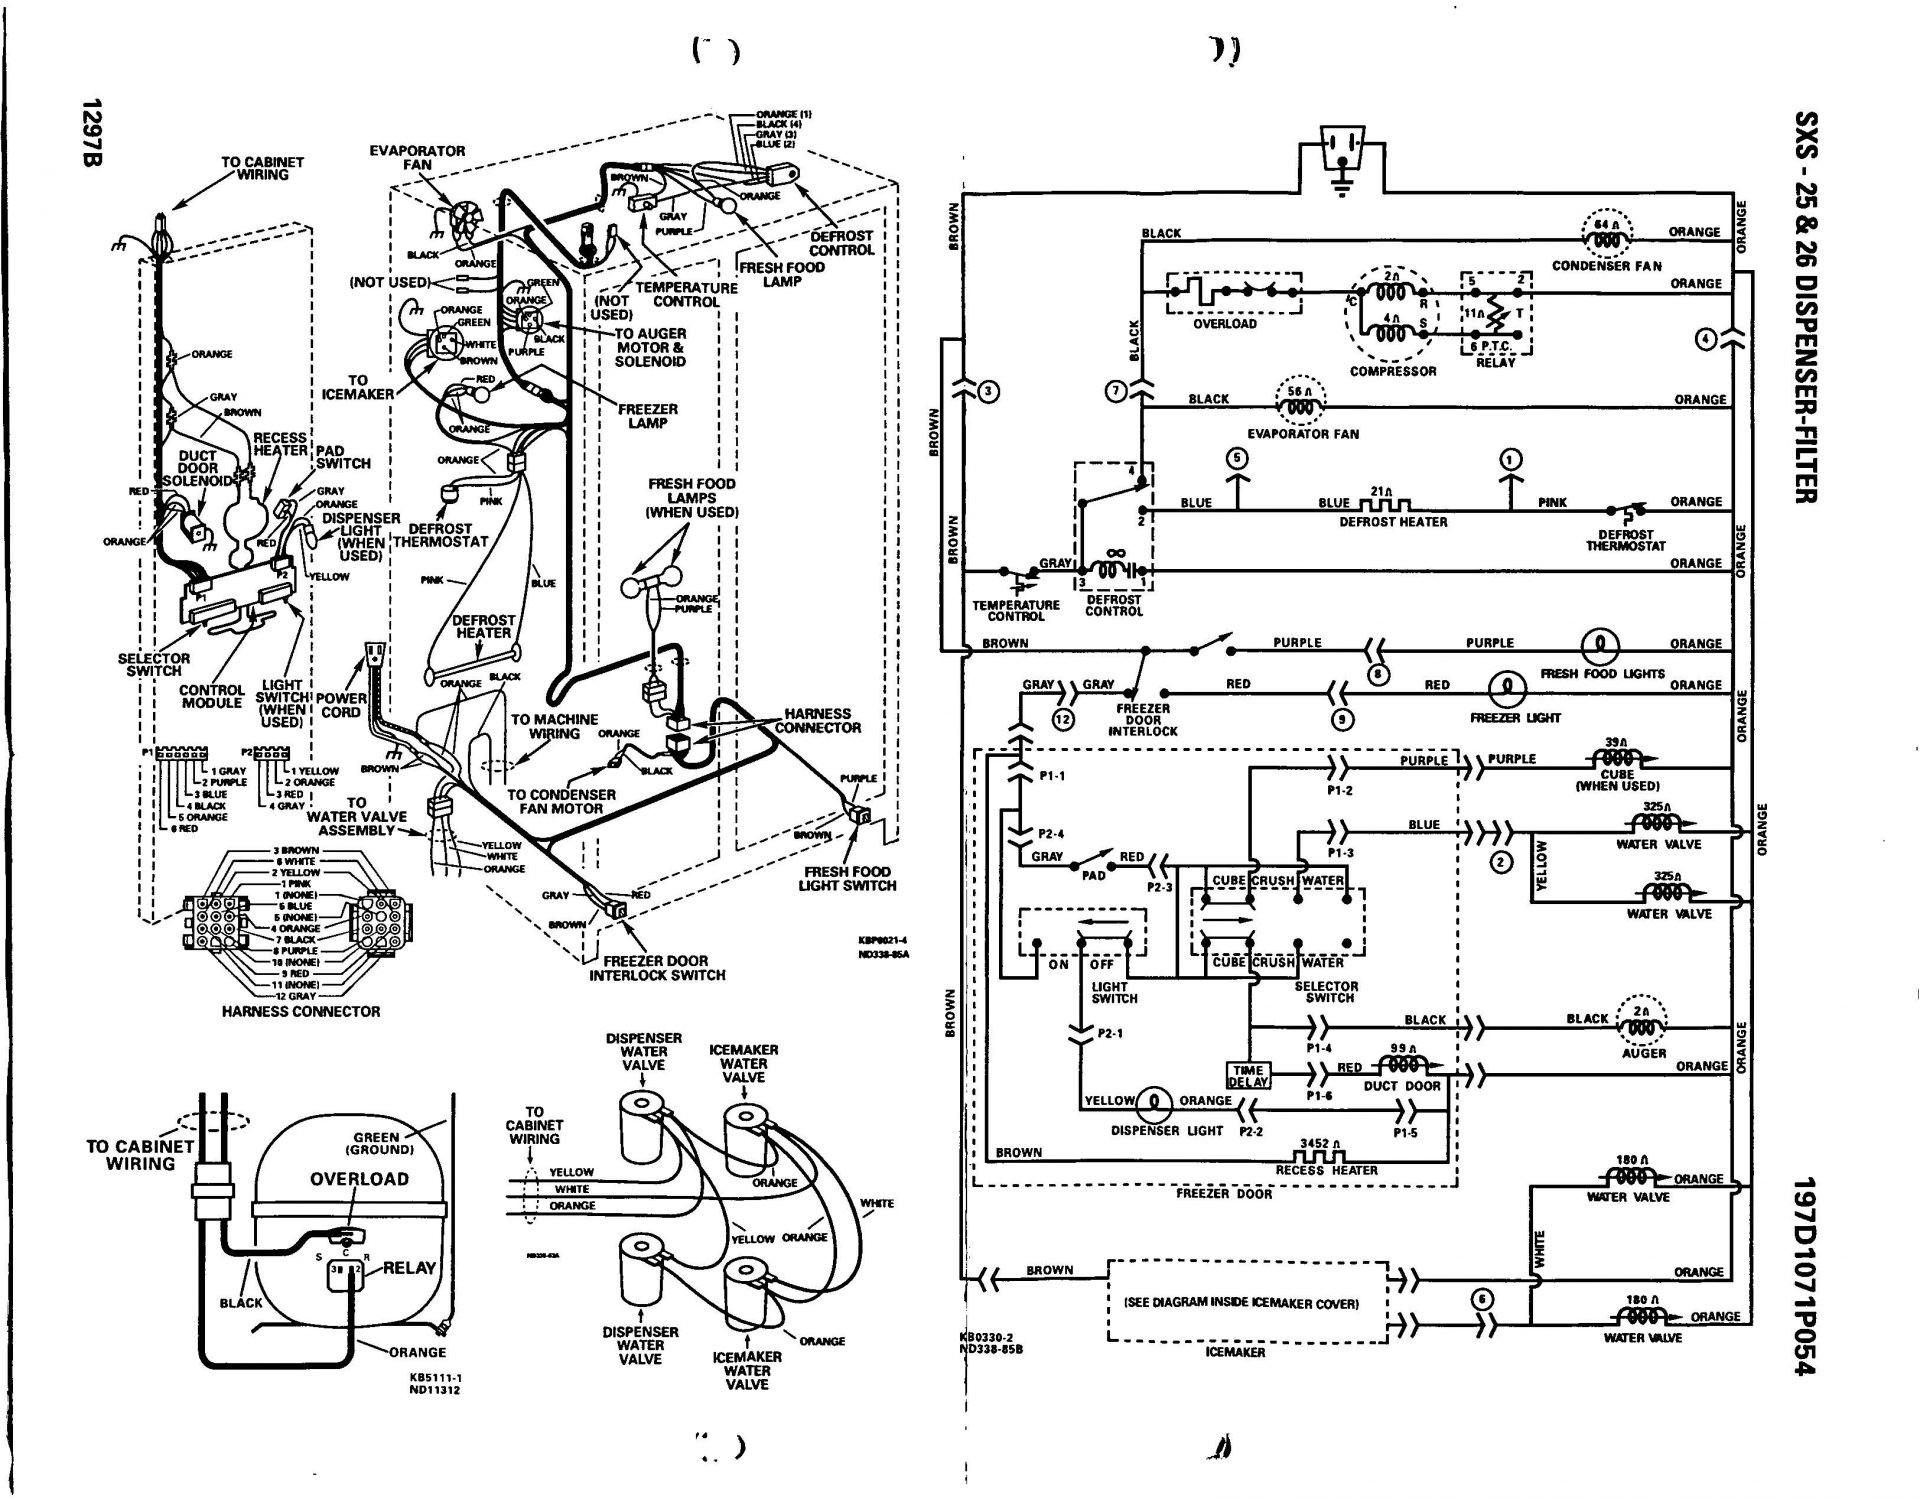 kenmore dryer thermostat wiring diagram Collection Kenmore Dryer Model 110 Parts Diagram Inspirational Kenmore Gas DOWNLOAD Wiring Diagram